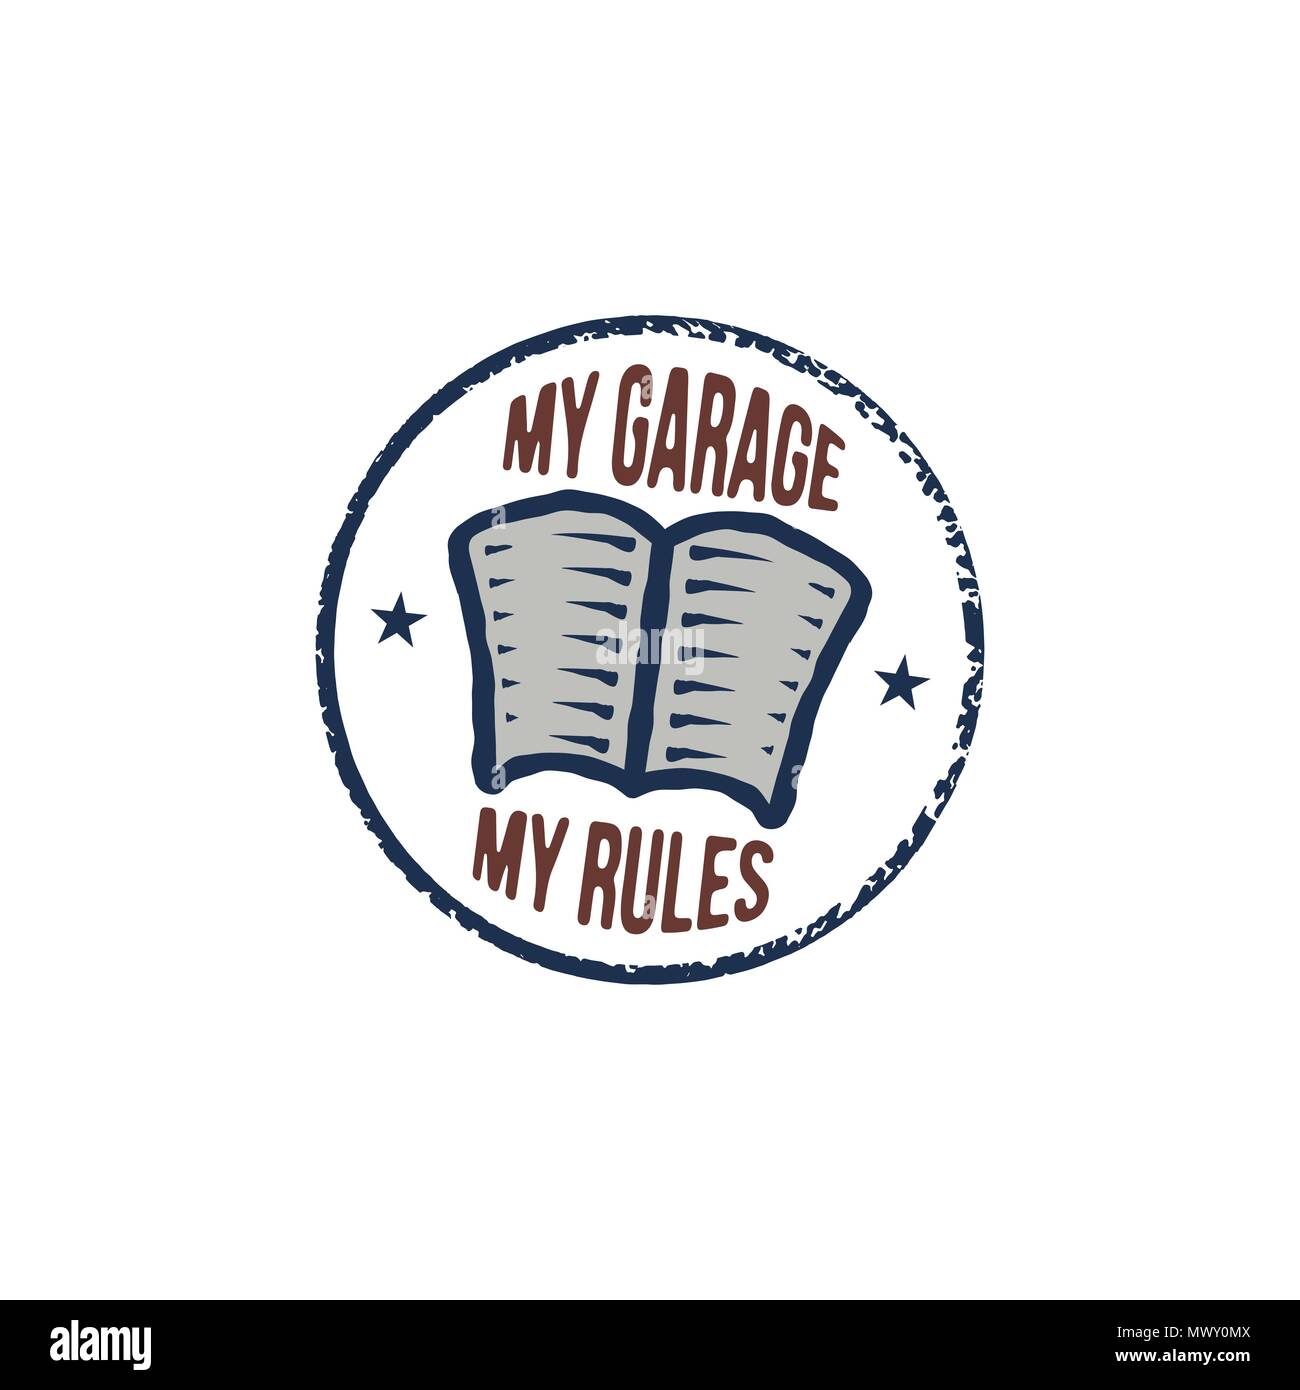 Garage Rules Poster Stock Vector Images Alamy